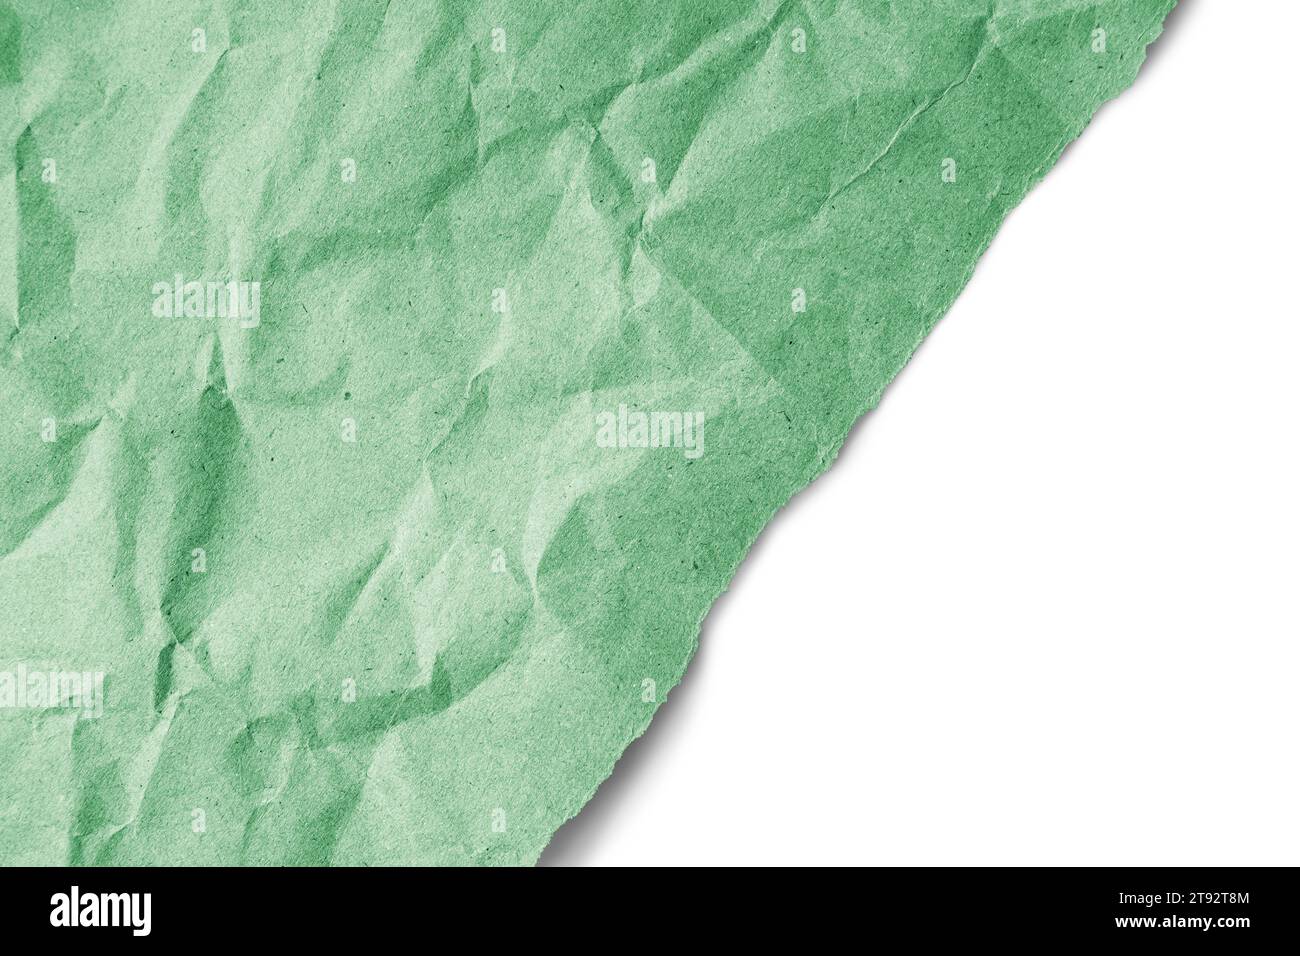 Crumpled mint green paper textured background